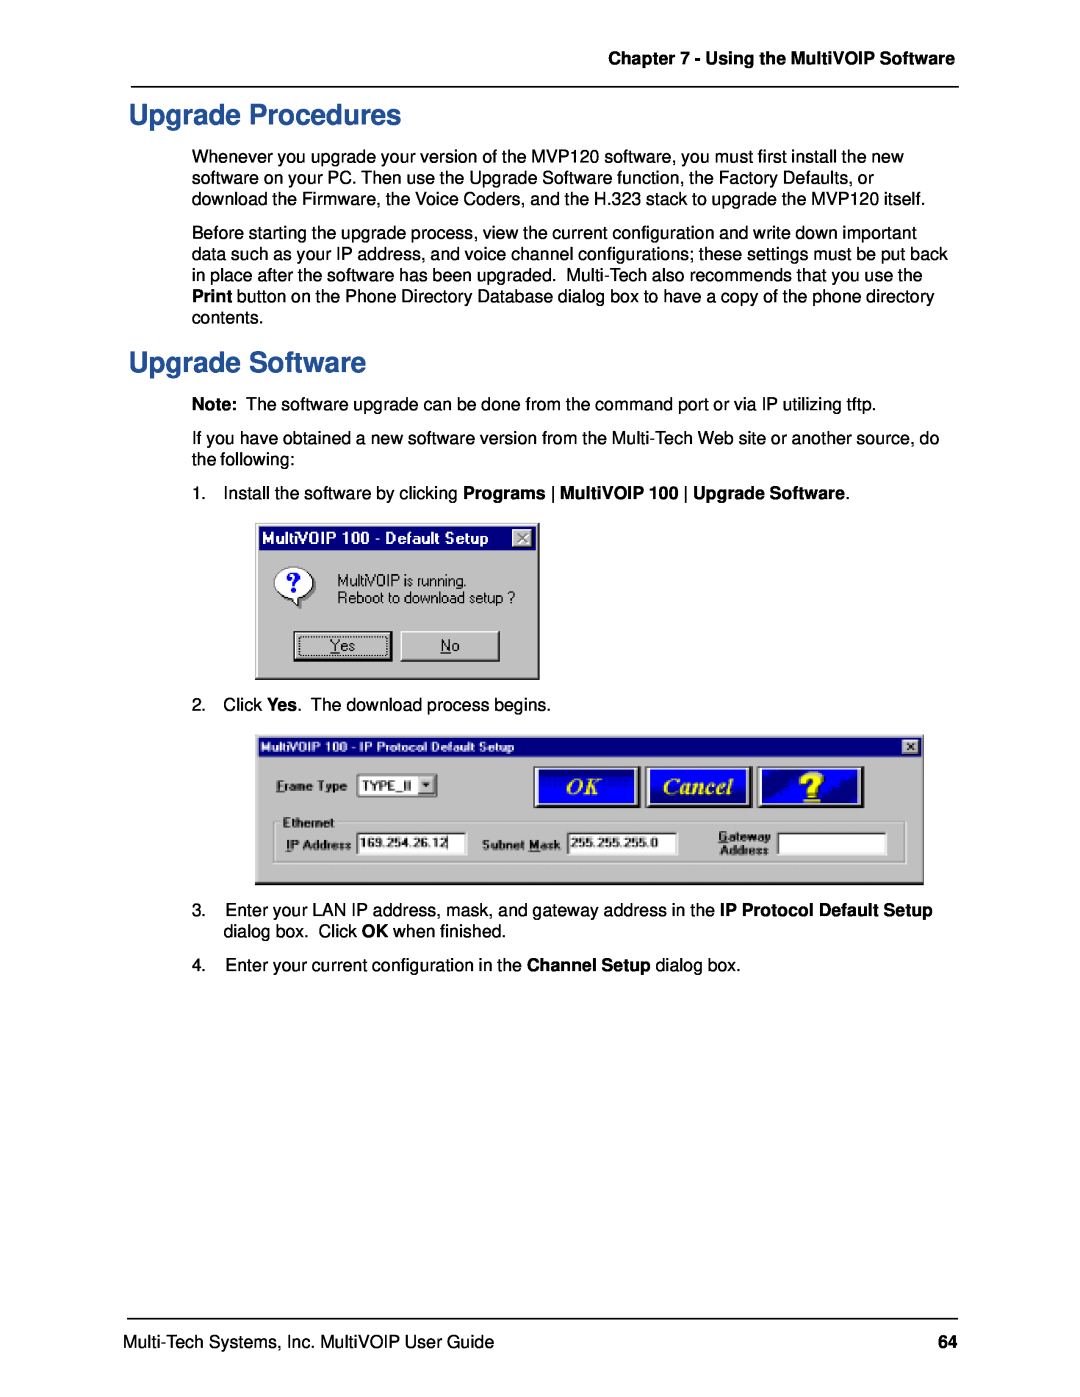 Multi-Tech Systems MVP120 manual Upgrade Procedures, Upgrade Software, Using the MultiVOIP Software 